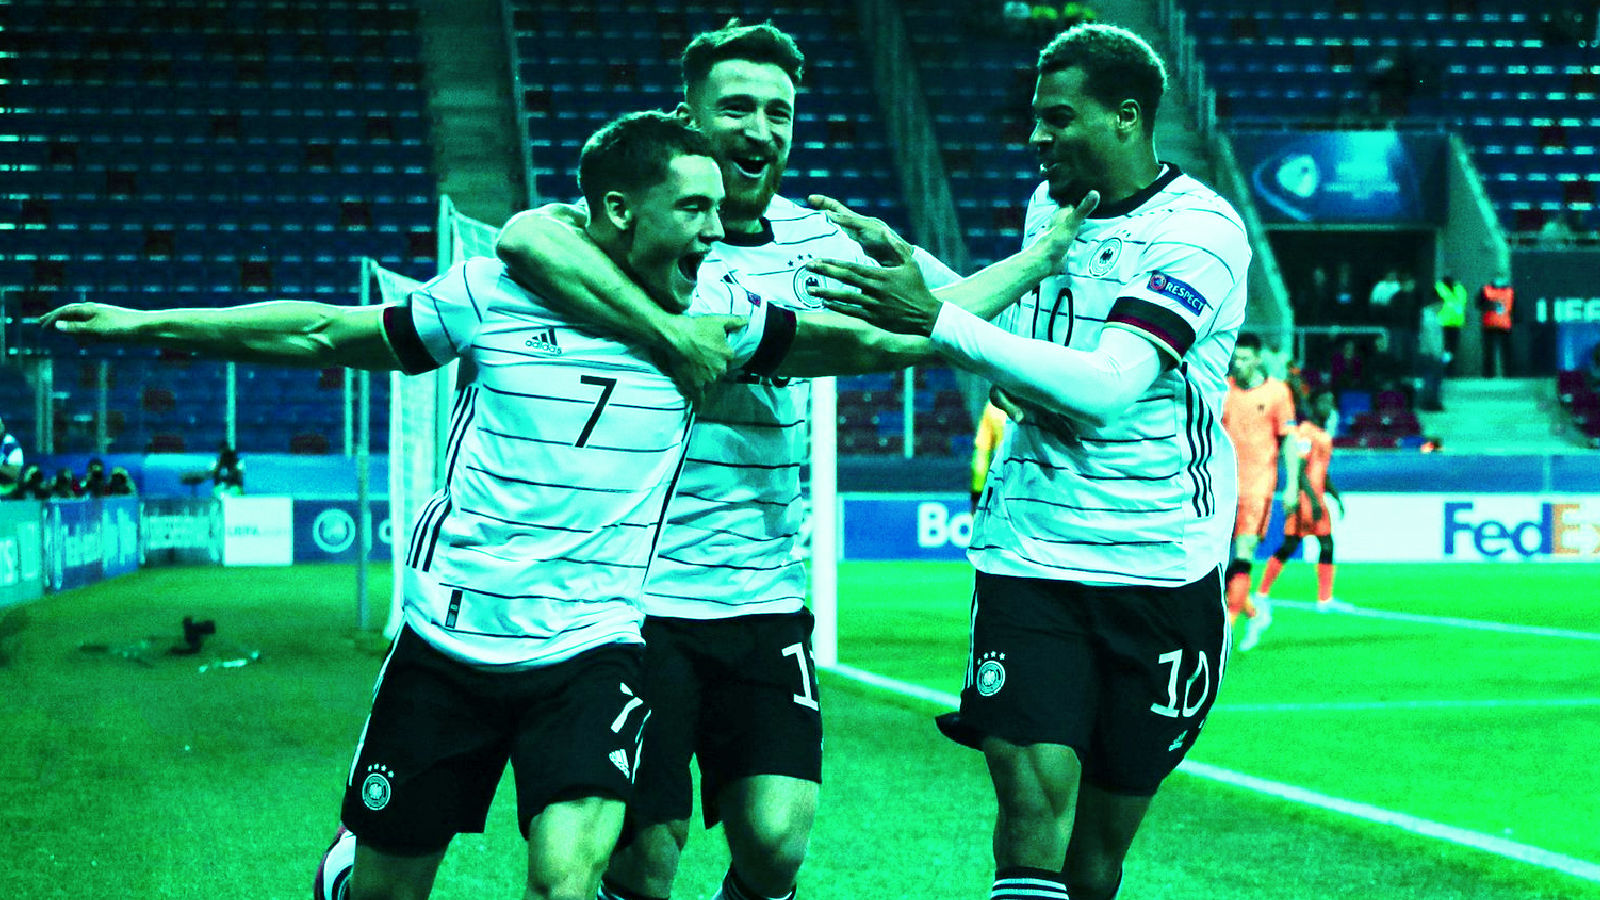 Video: Florian Wirtz puts away cold-blooded Germany team goal against Netherlands U21